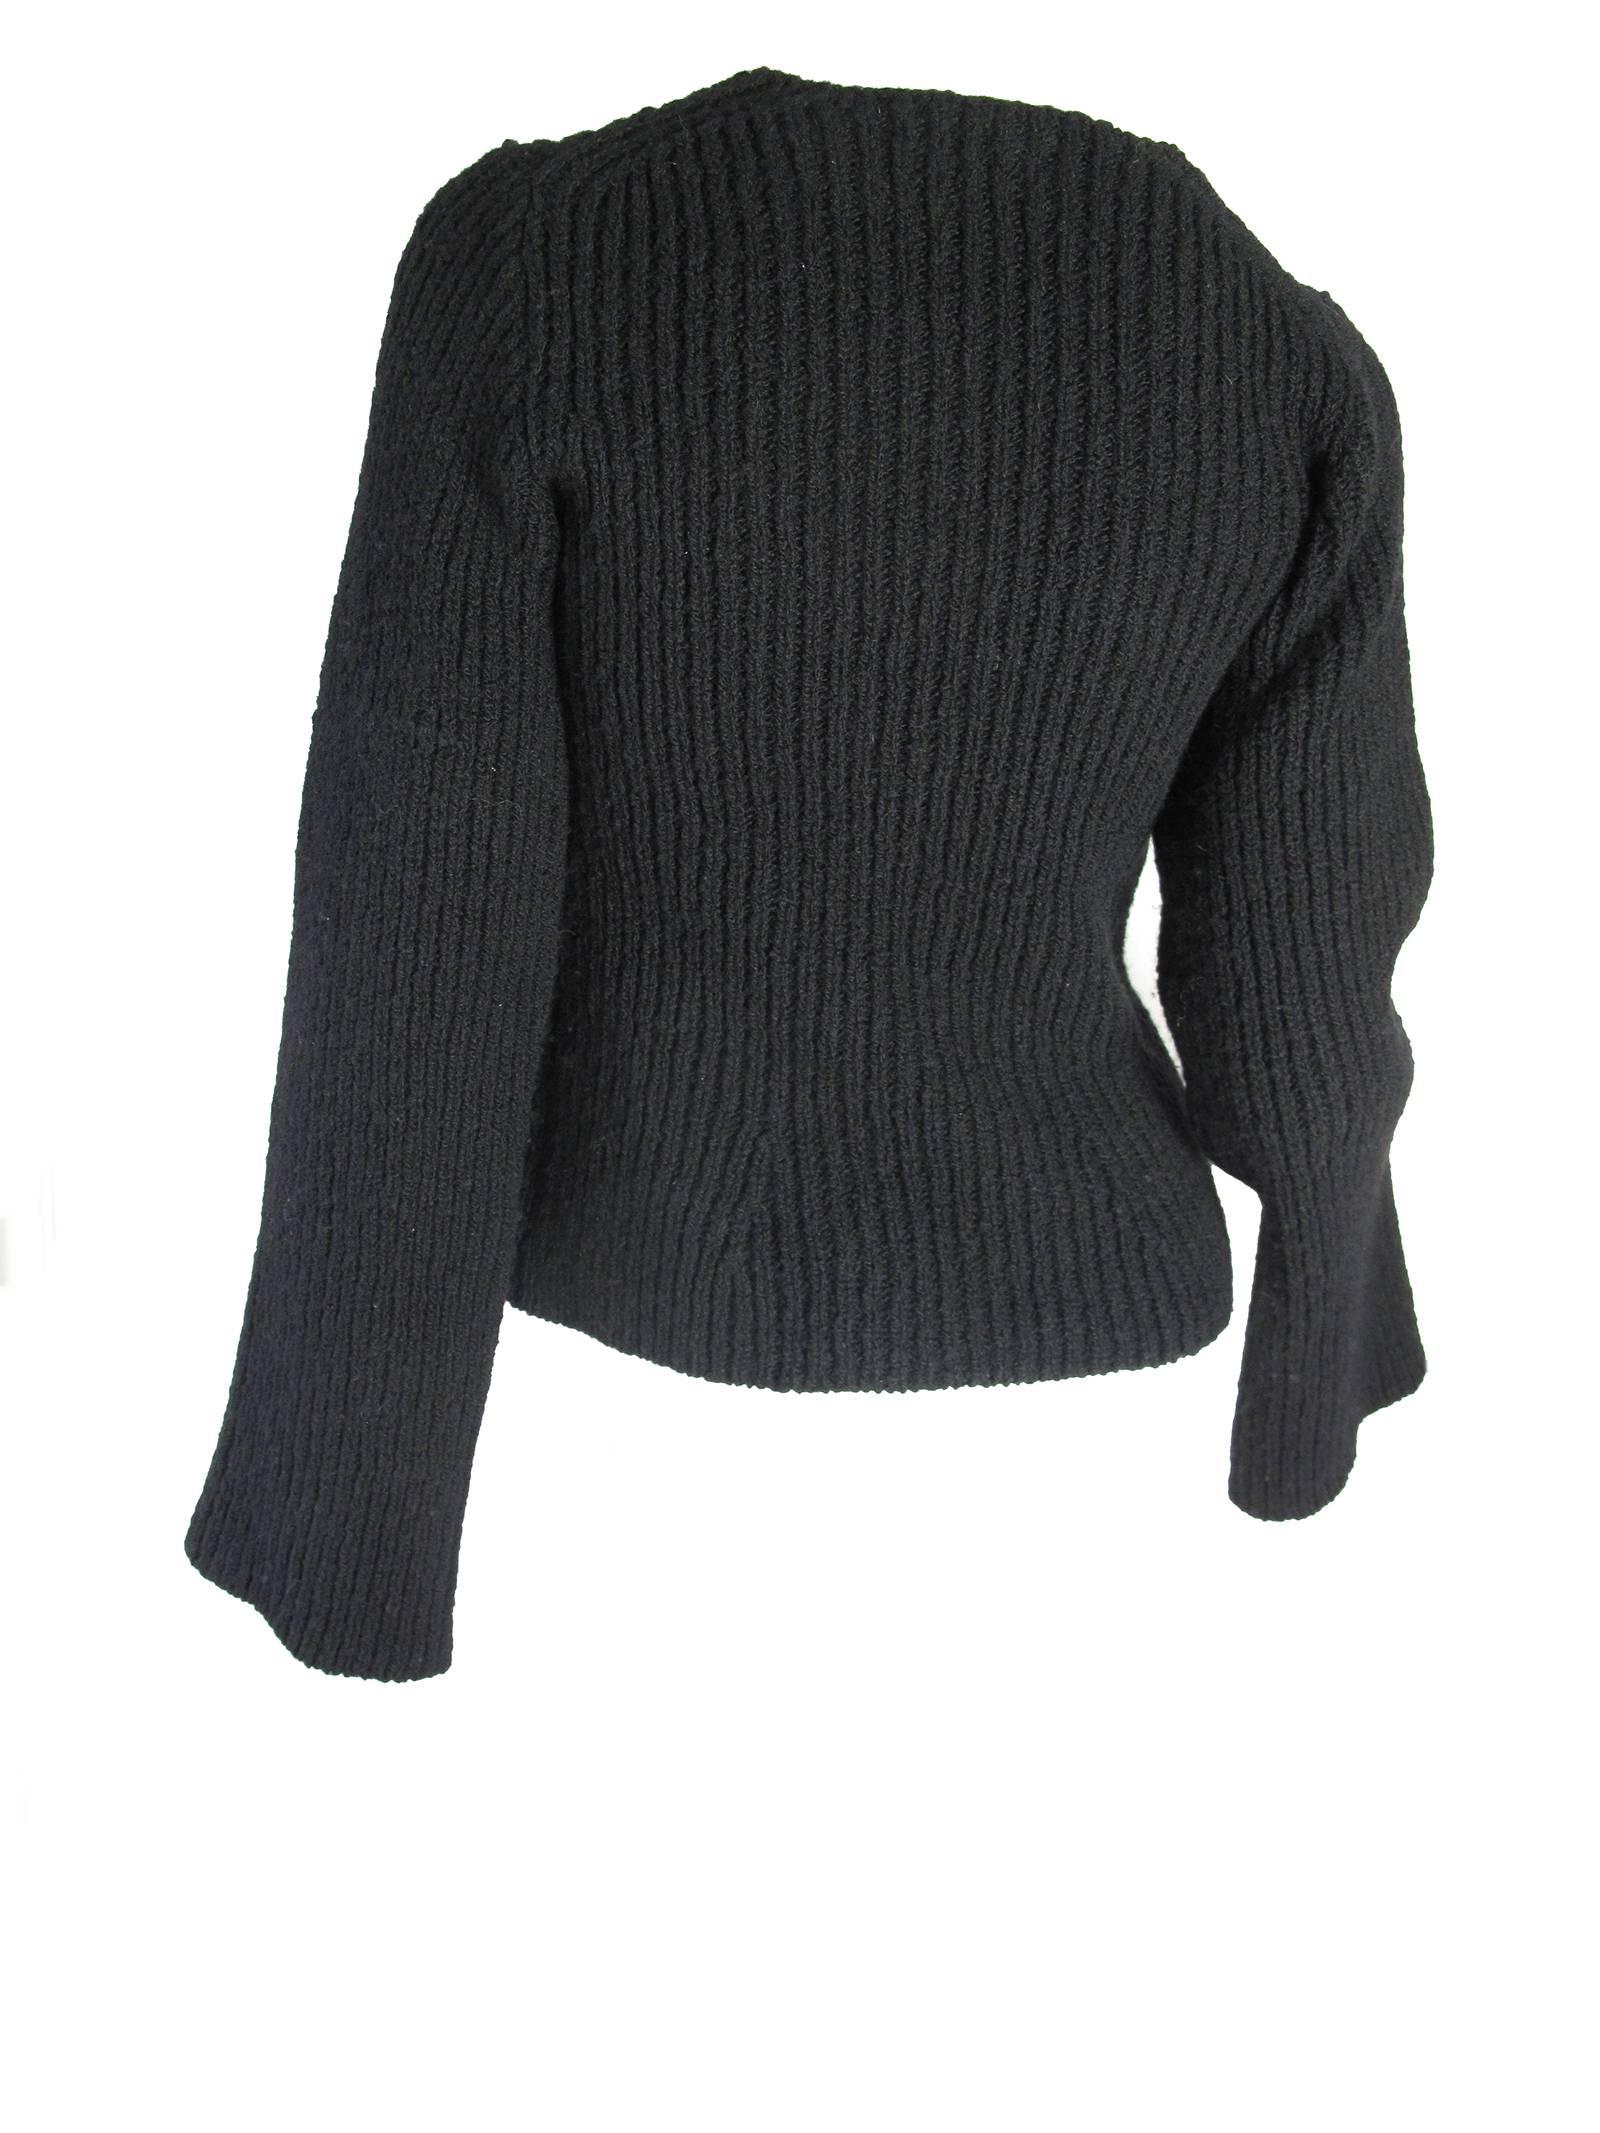 Black Ann Demeulemeester Ribbed Wool Sweater, 1990s 